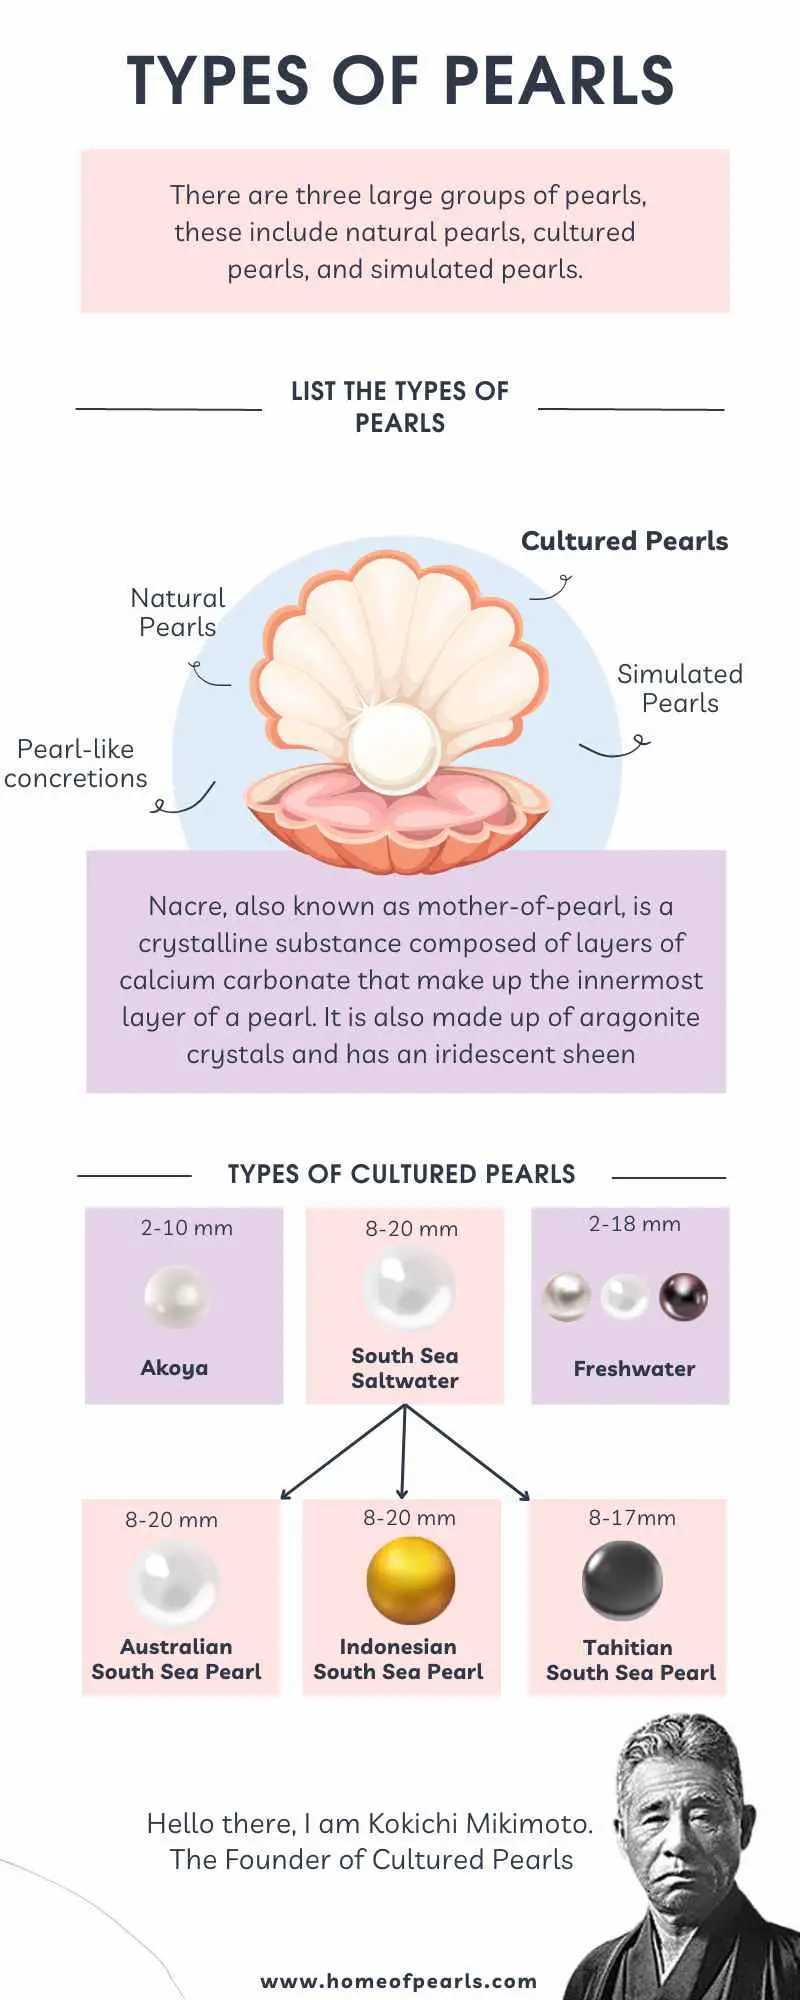 Types of Pearls Infographic